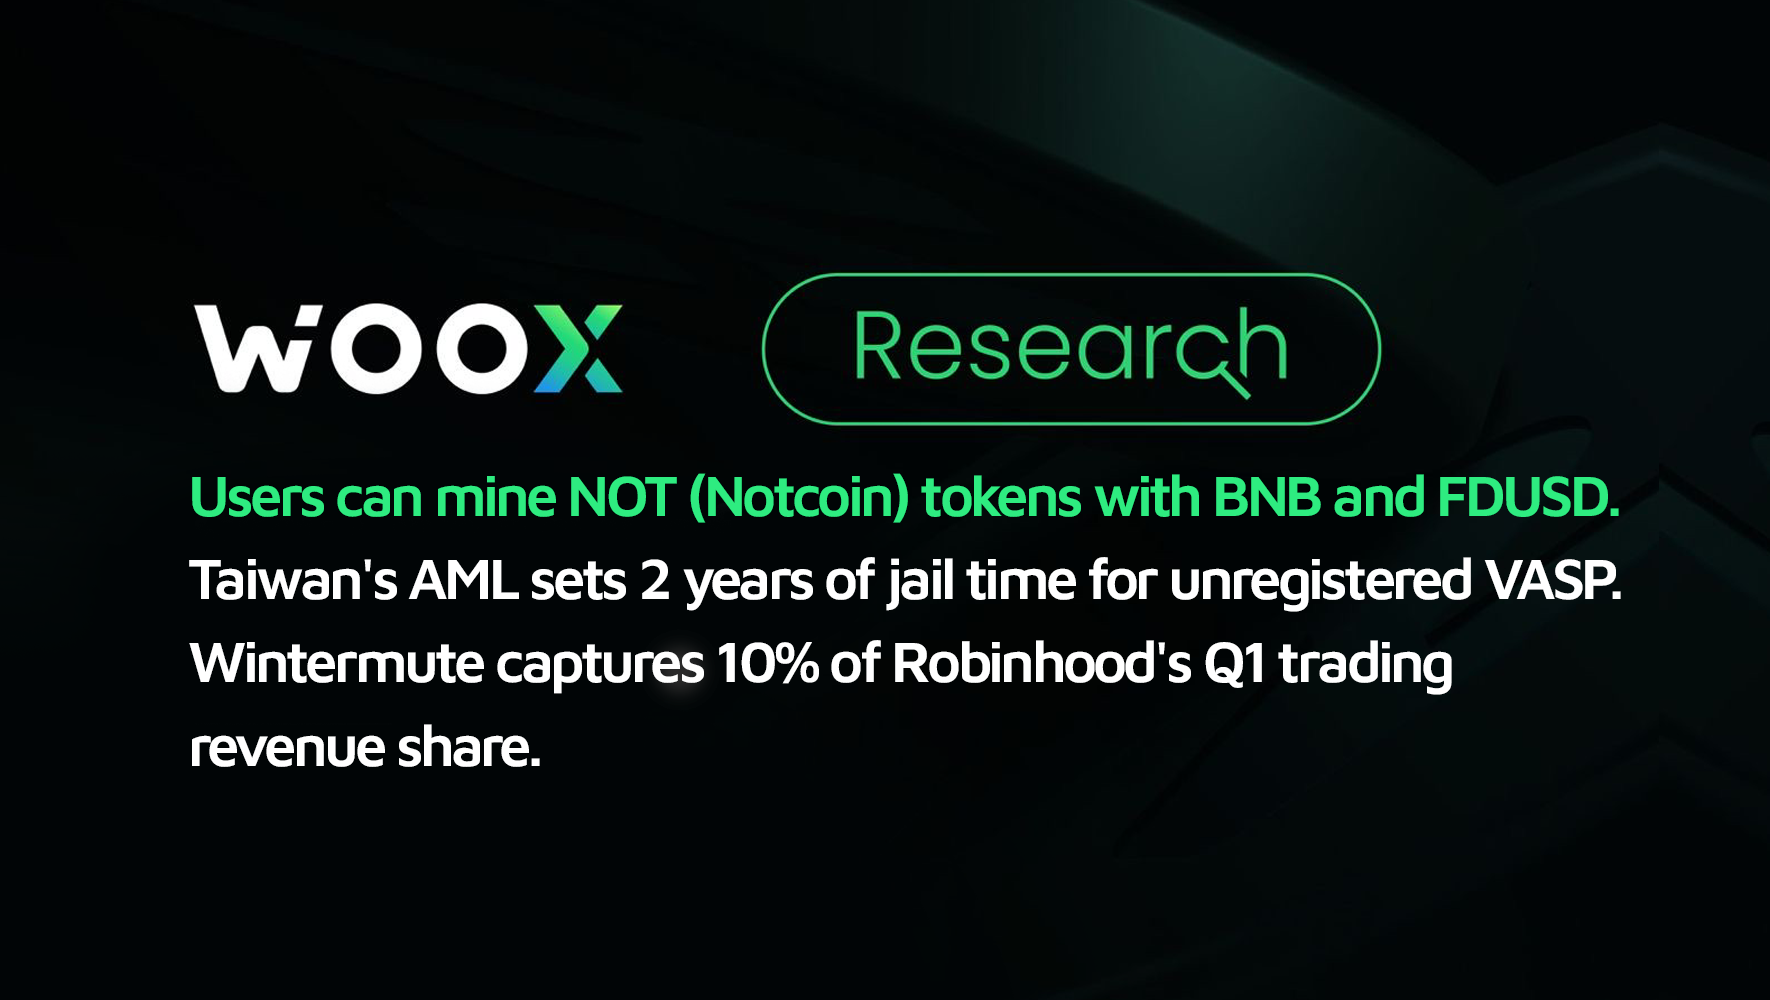 Users can mine NOT (Notcoin) tokens with BNB and FDUSD